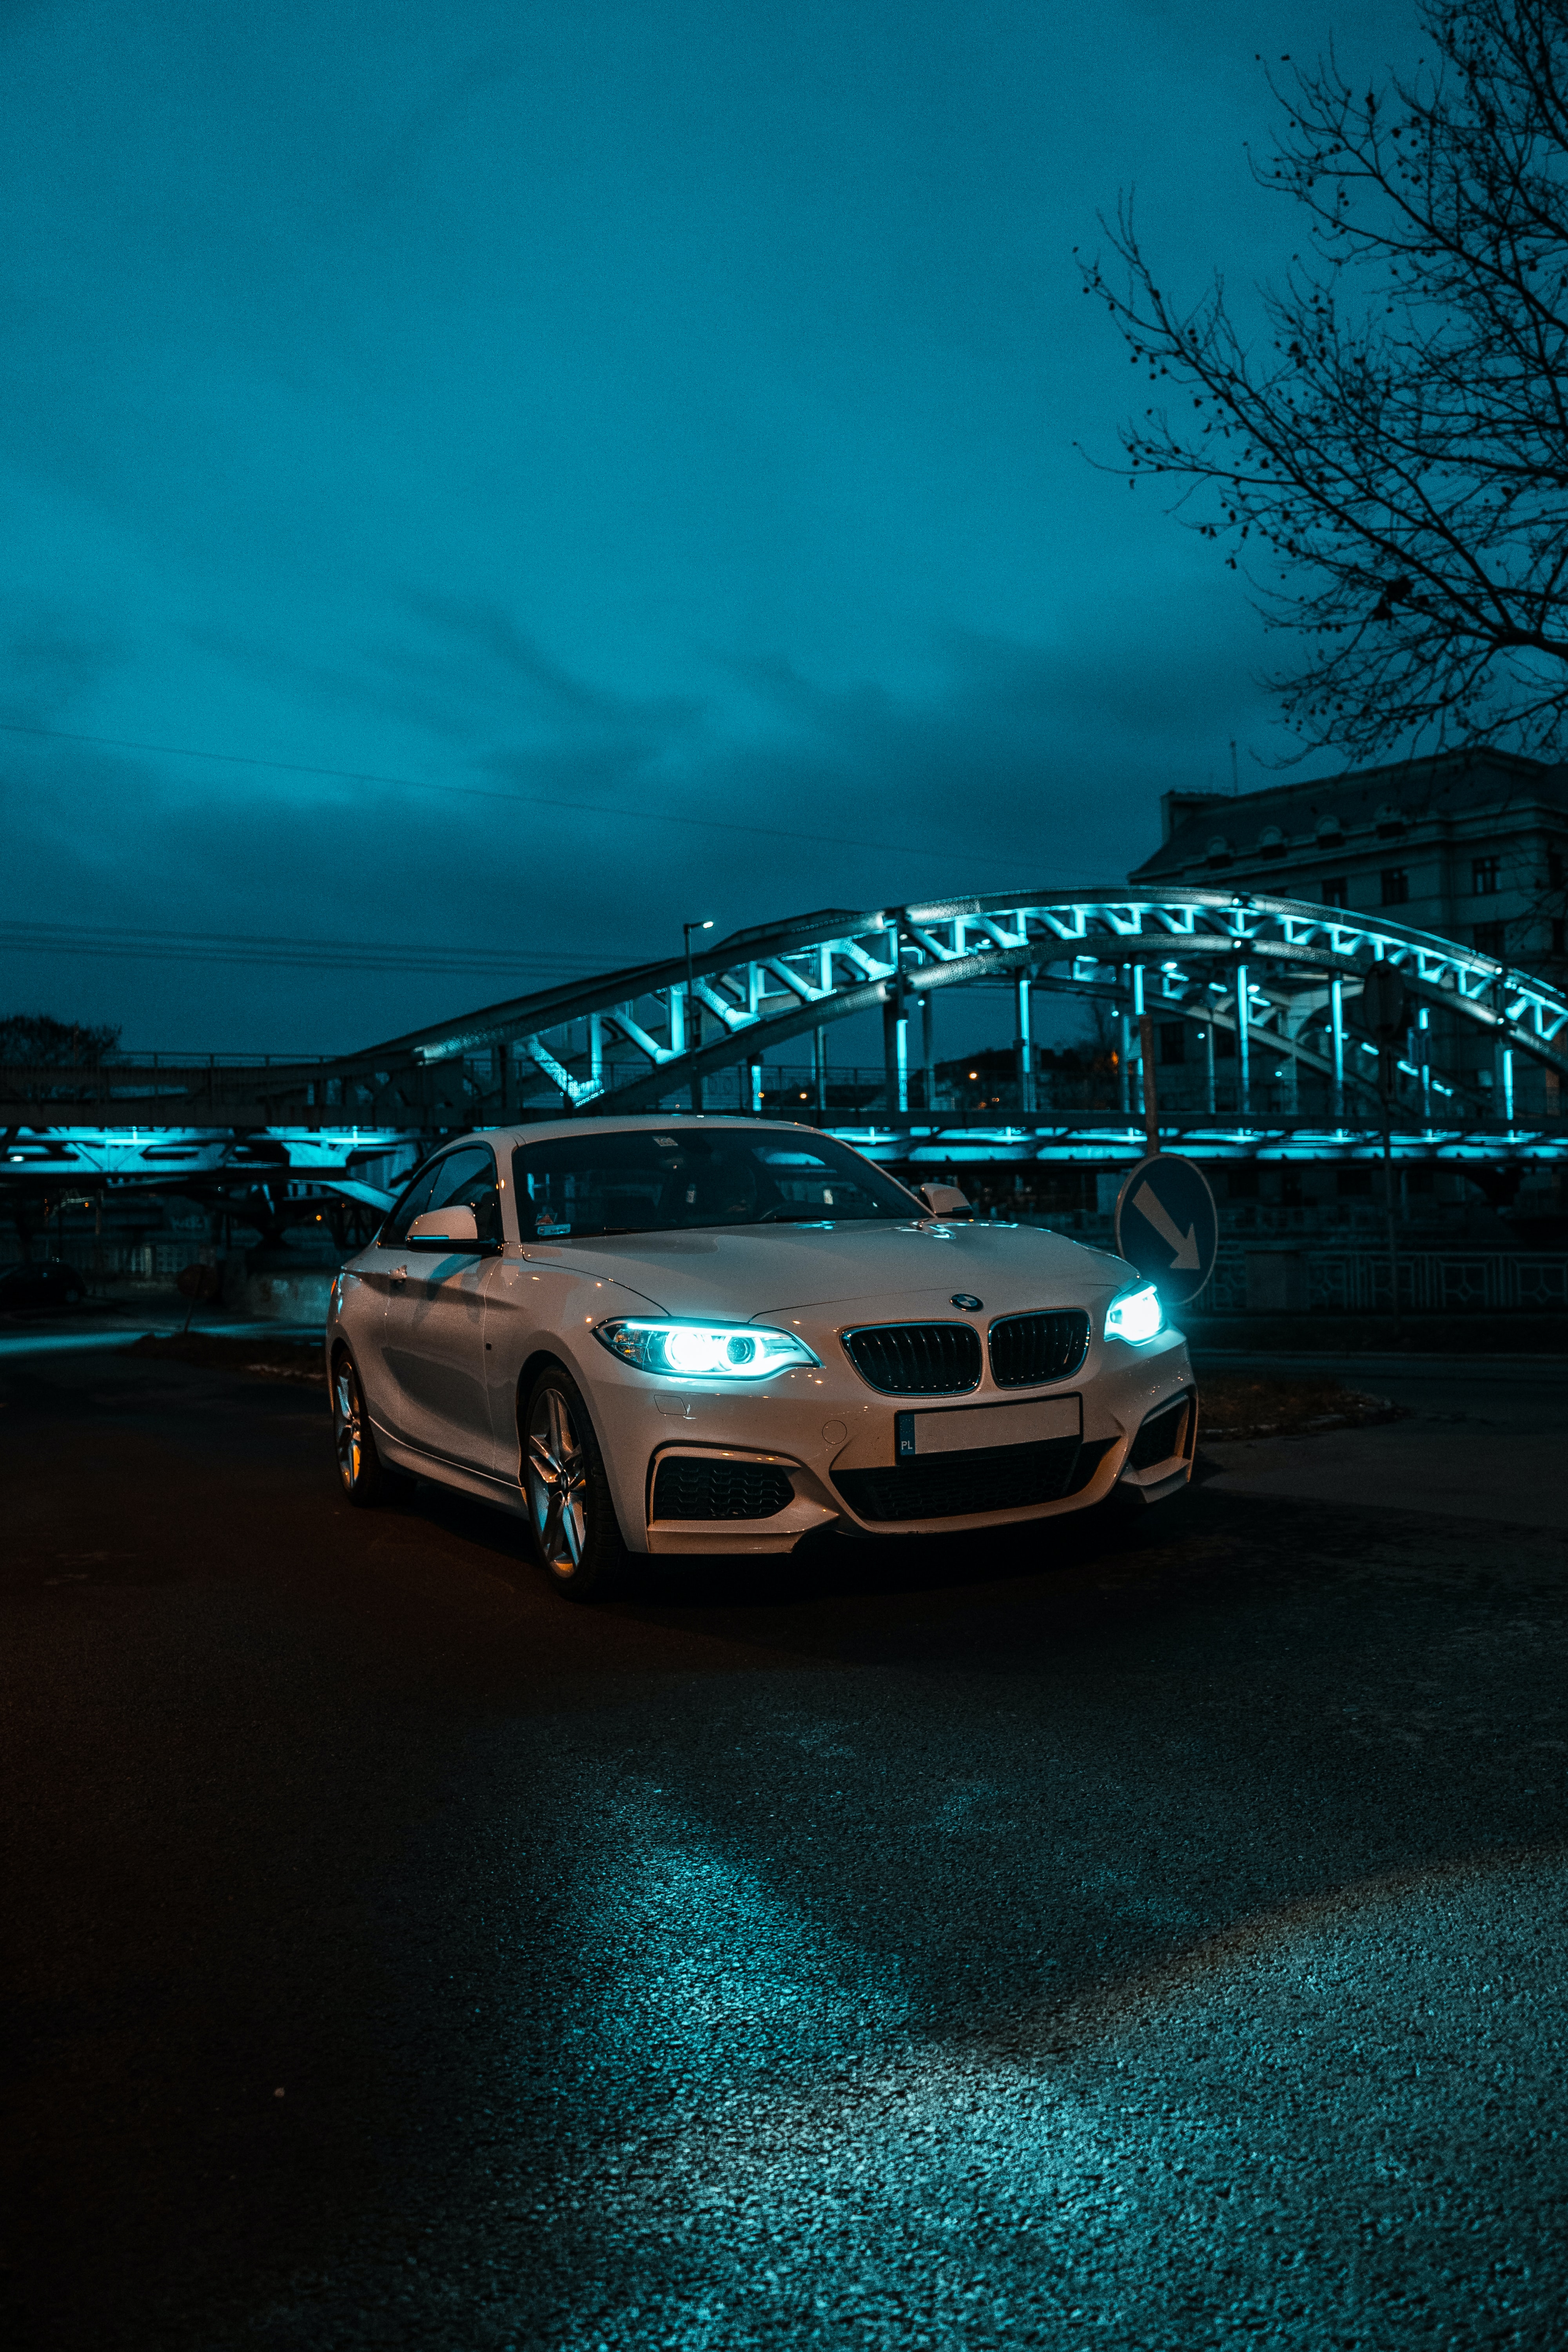 bmw, cars, headlights, front view, lights, white